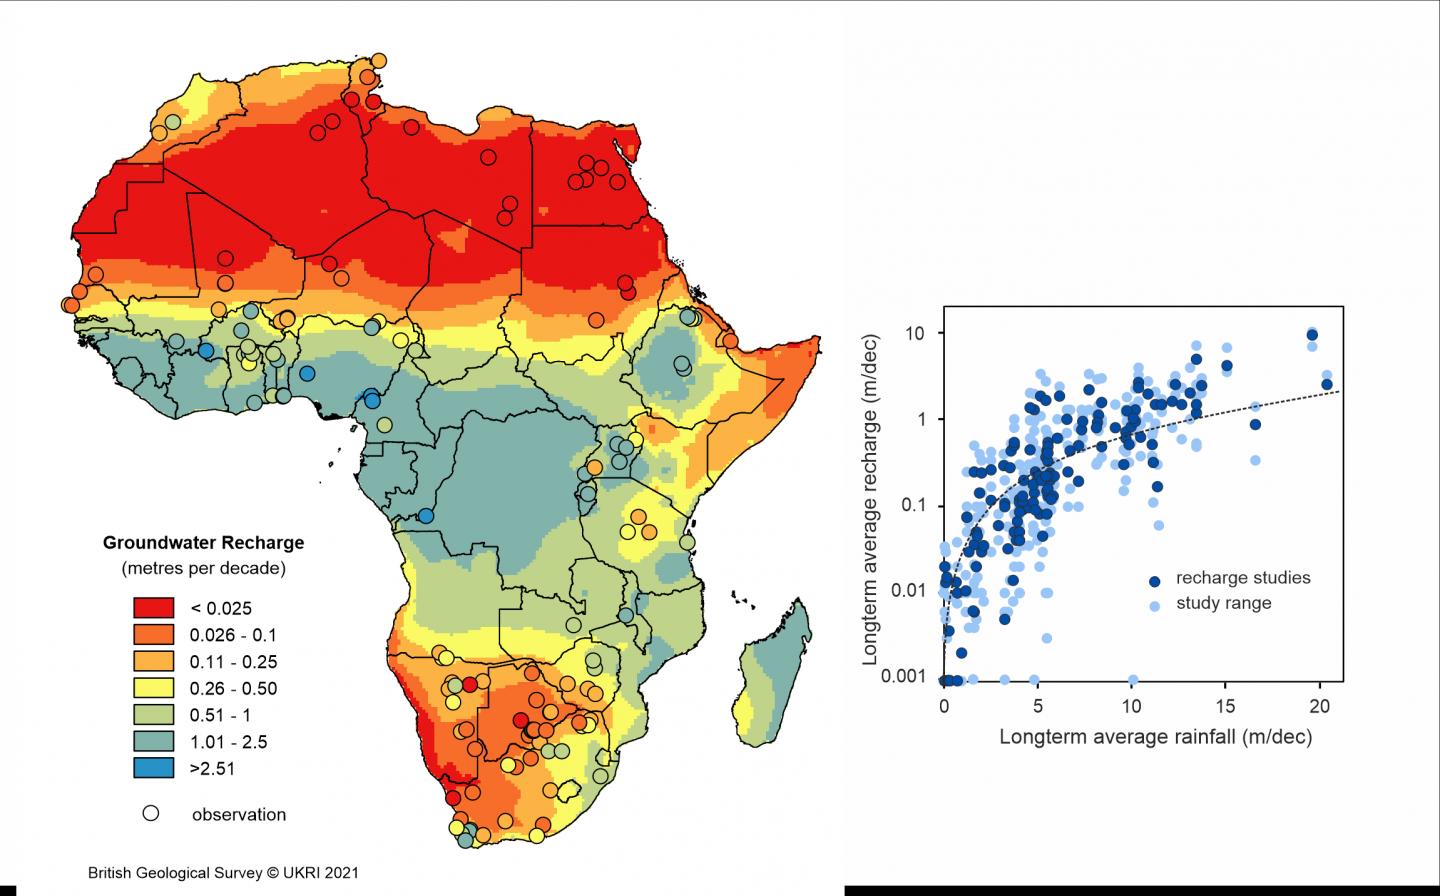 LTA groundwater recharge for Africa